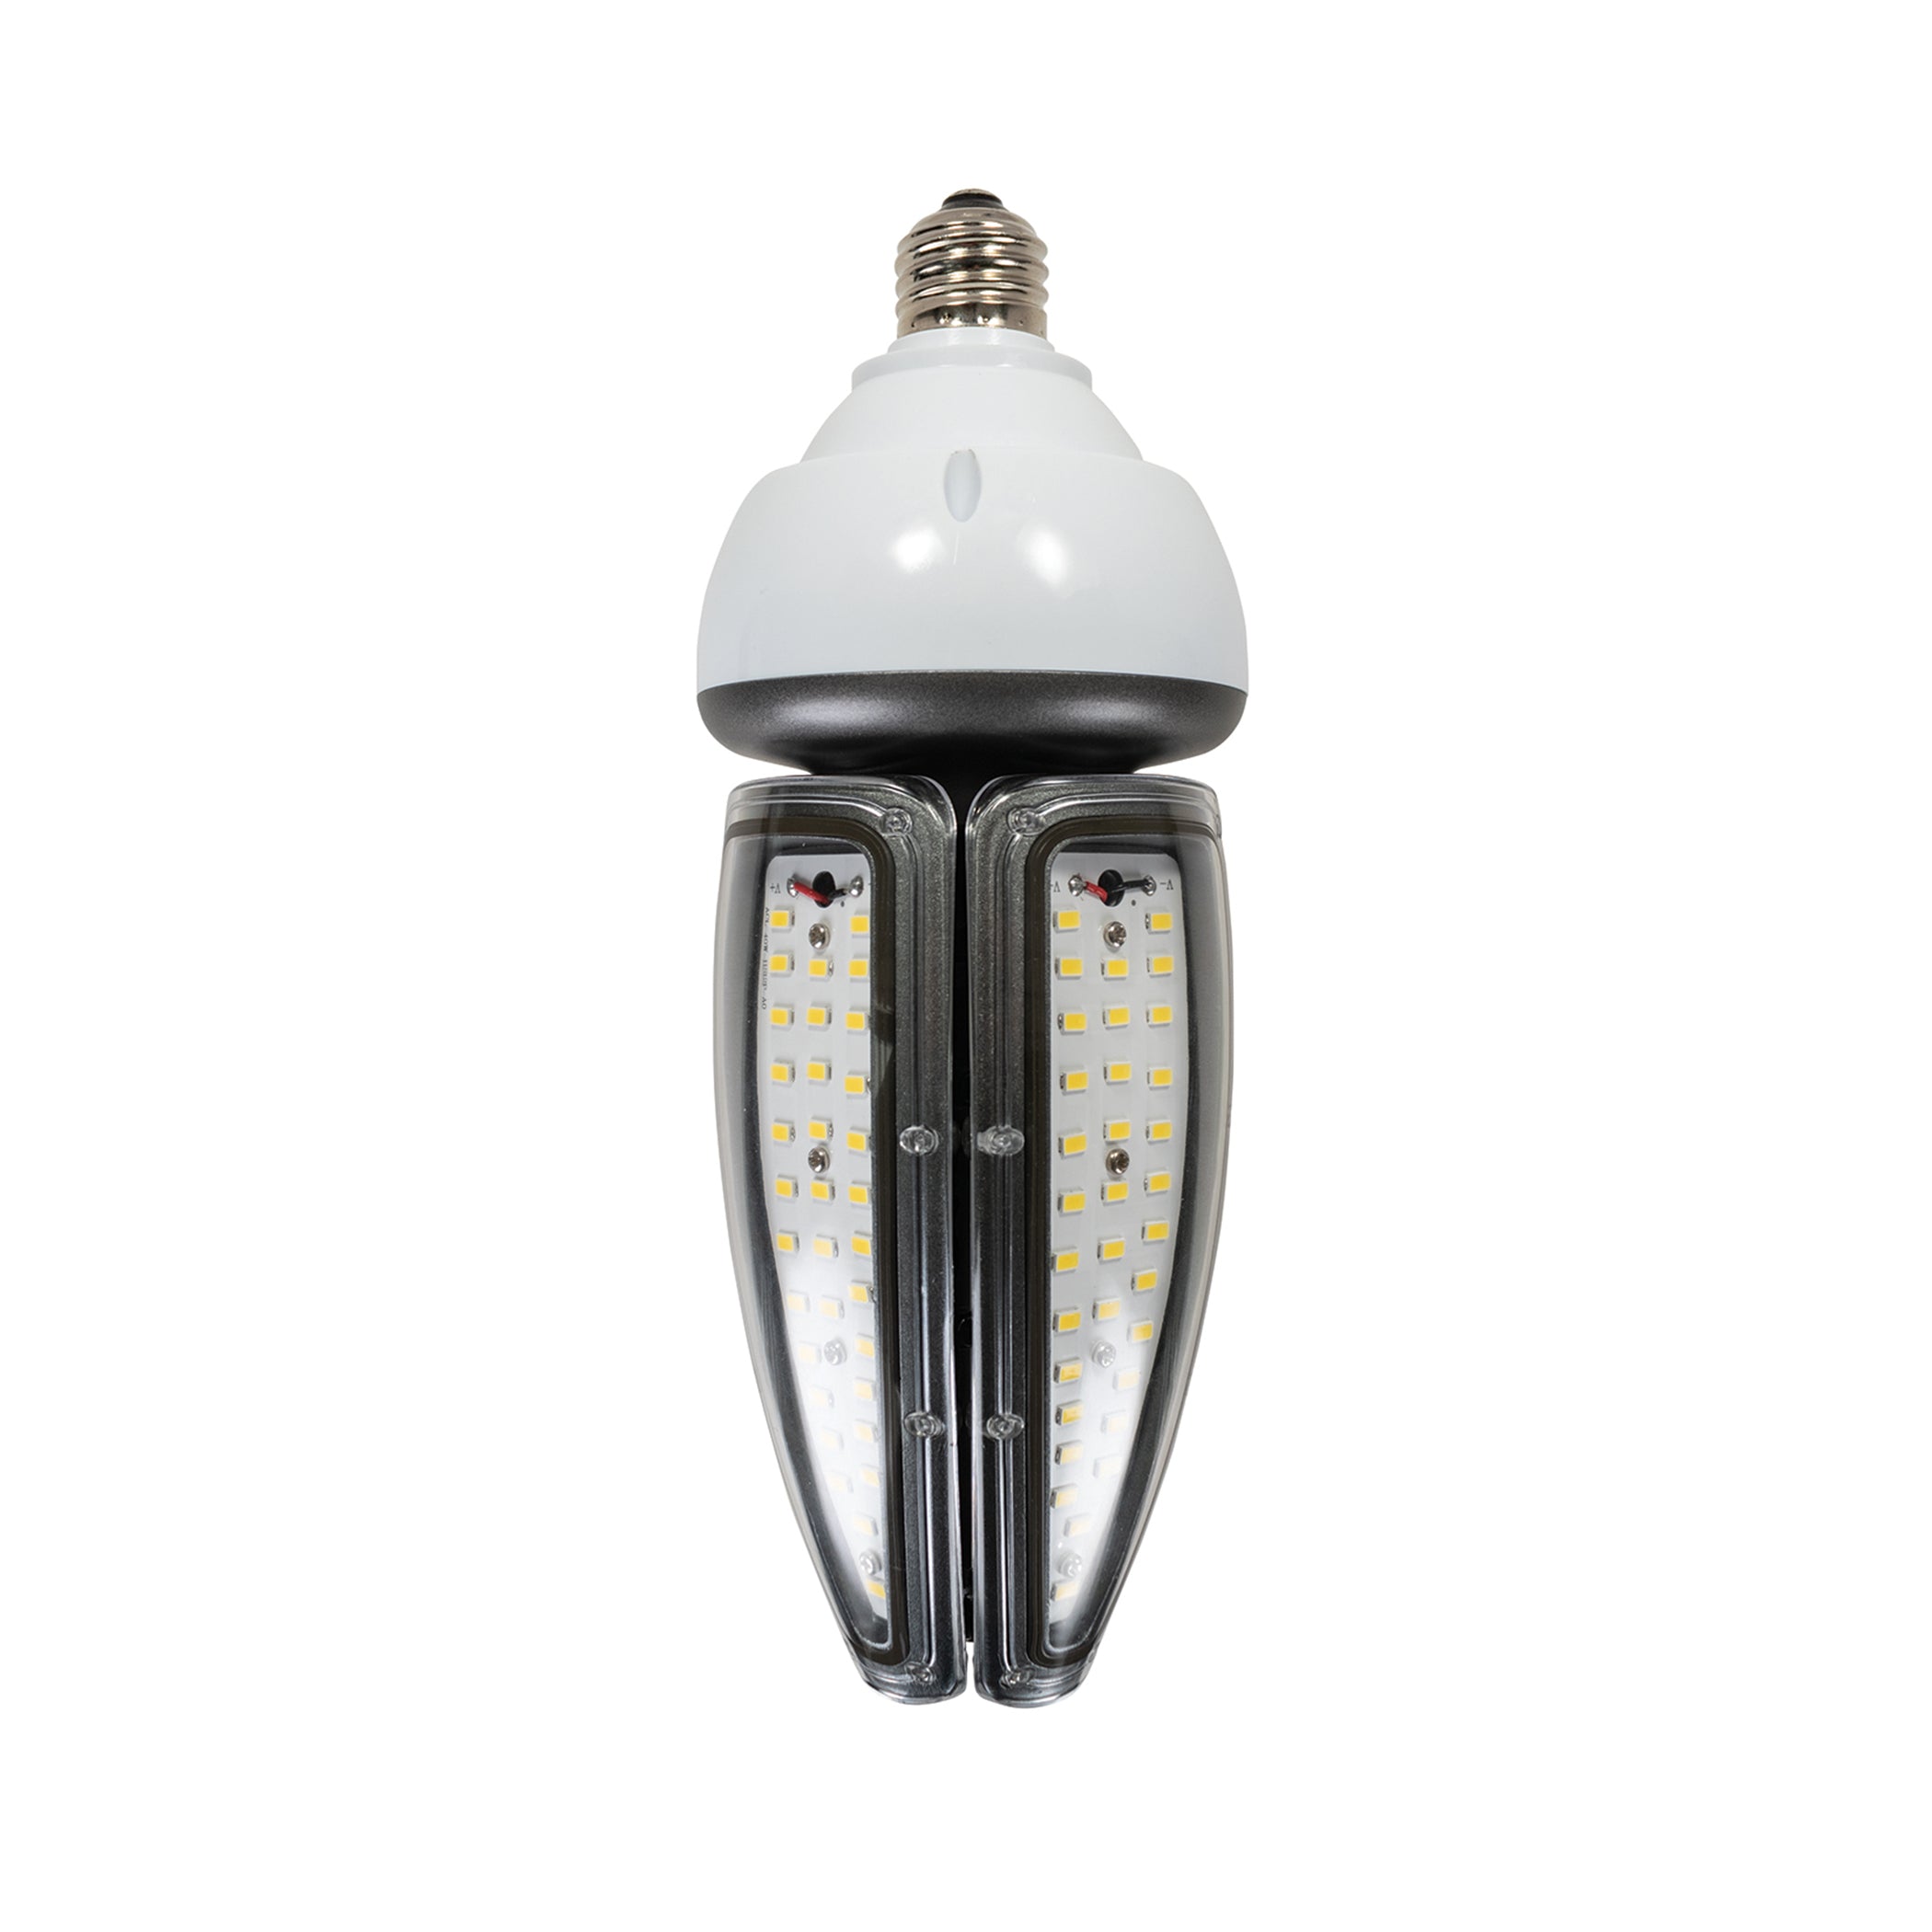 IP65 Wet Rated COB LED Bulb for Outdoor Use